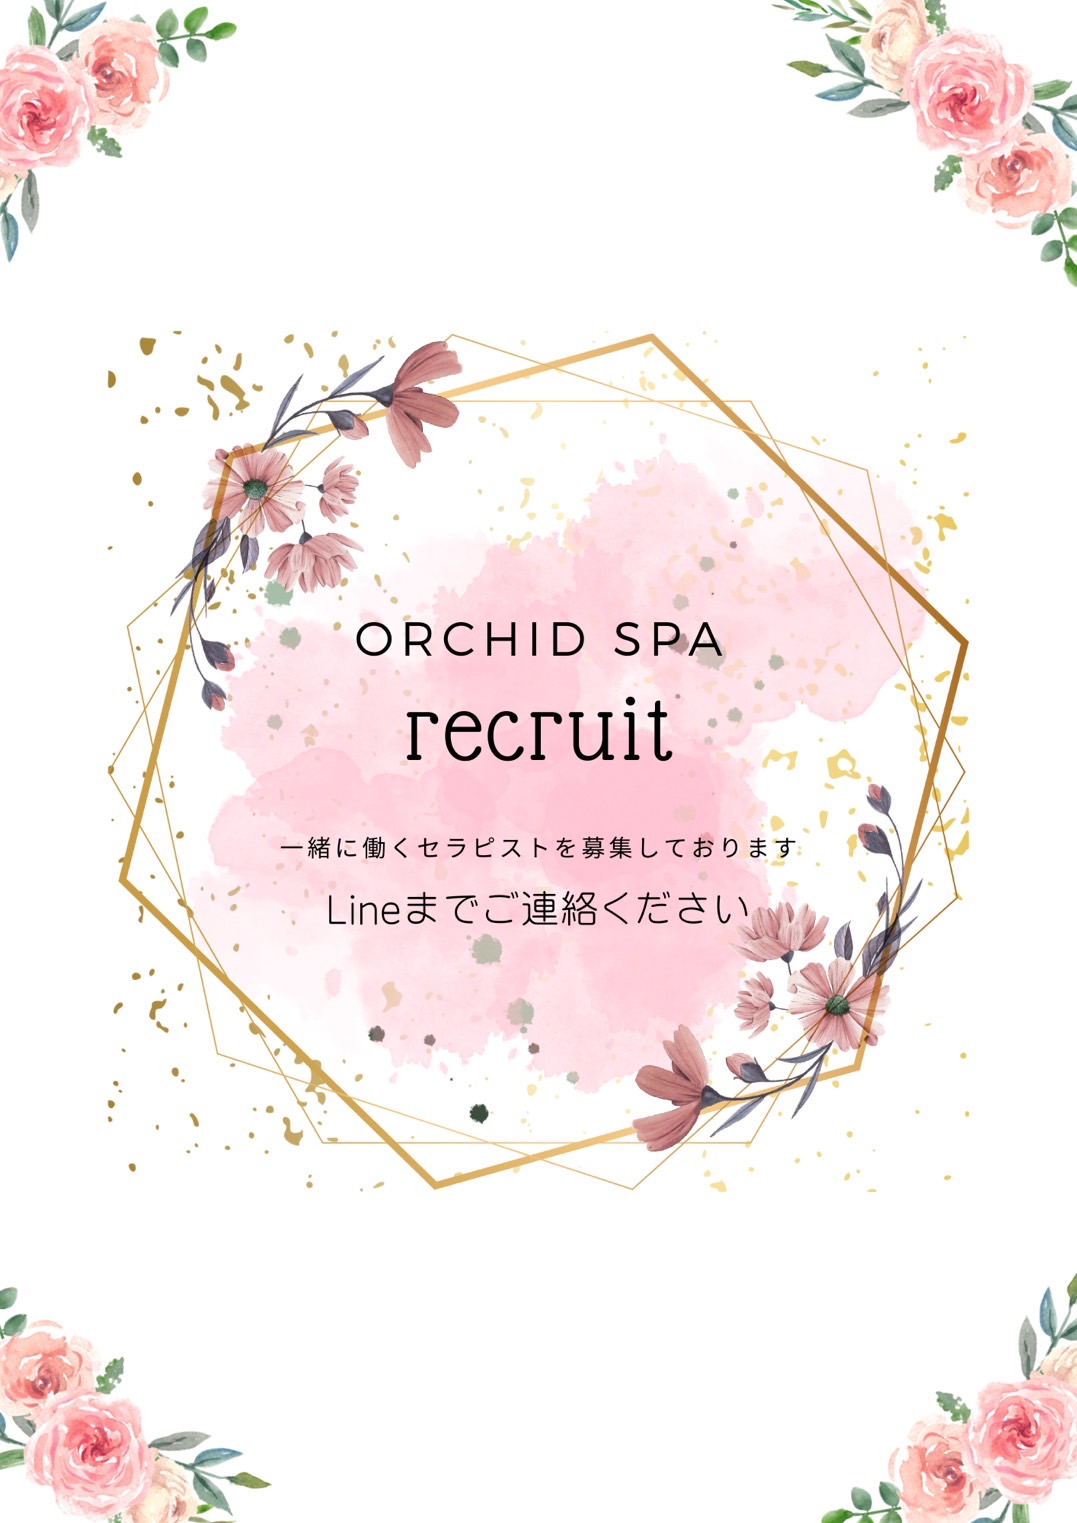 ORCHID SPA